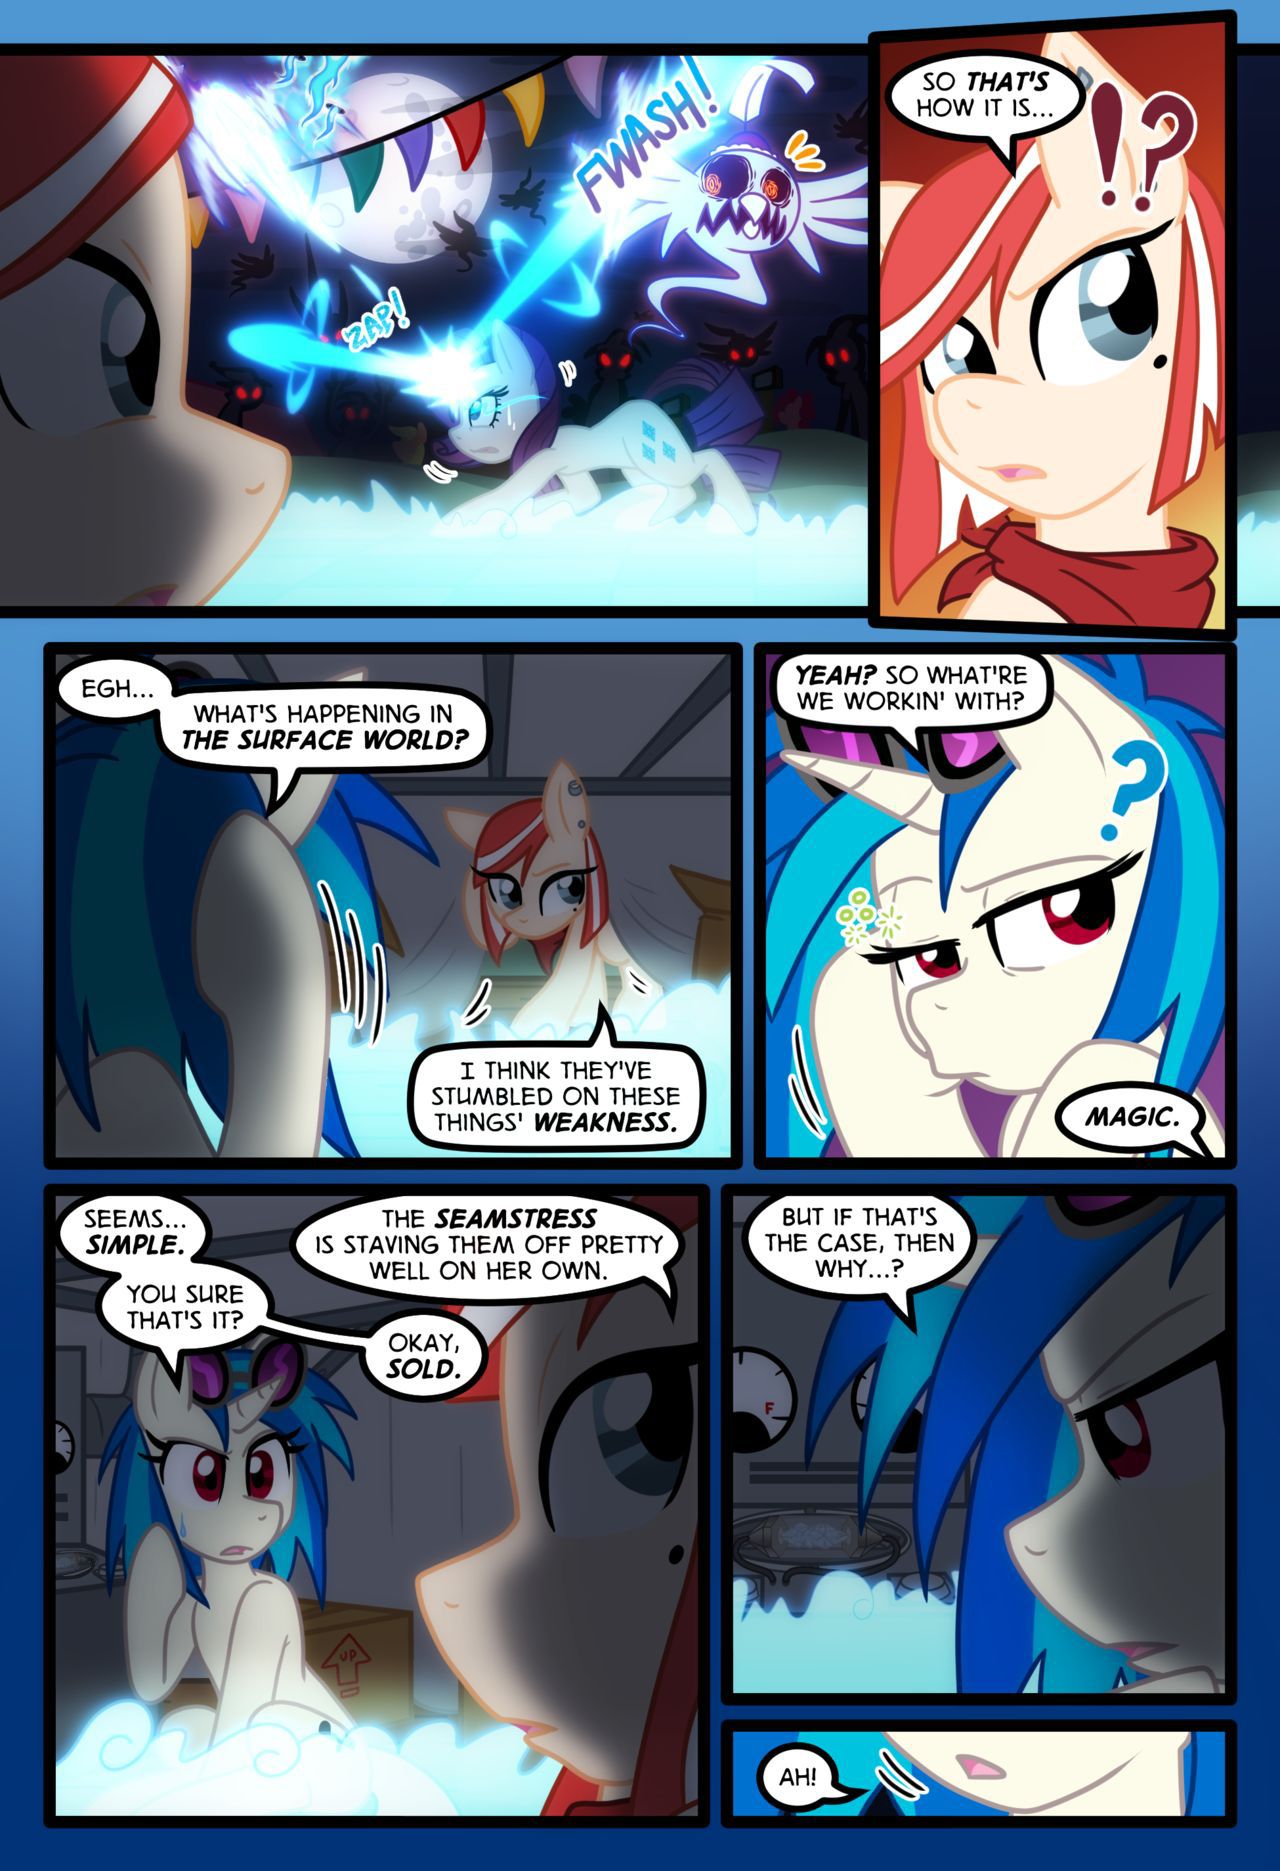 [Zaron] Lonely Hooves (My Little Pony Friendship Is Magic) [Ongoing] 148